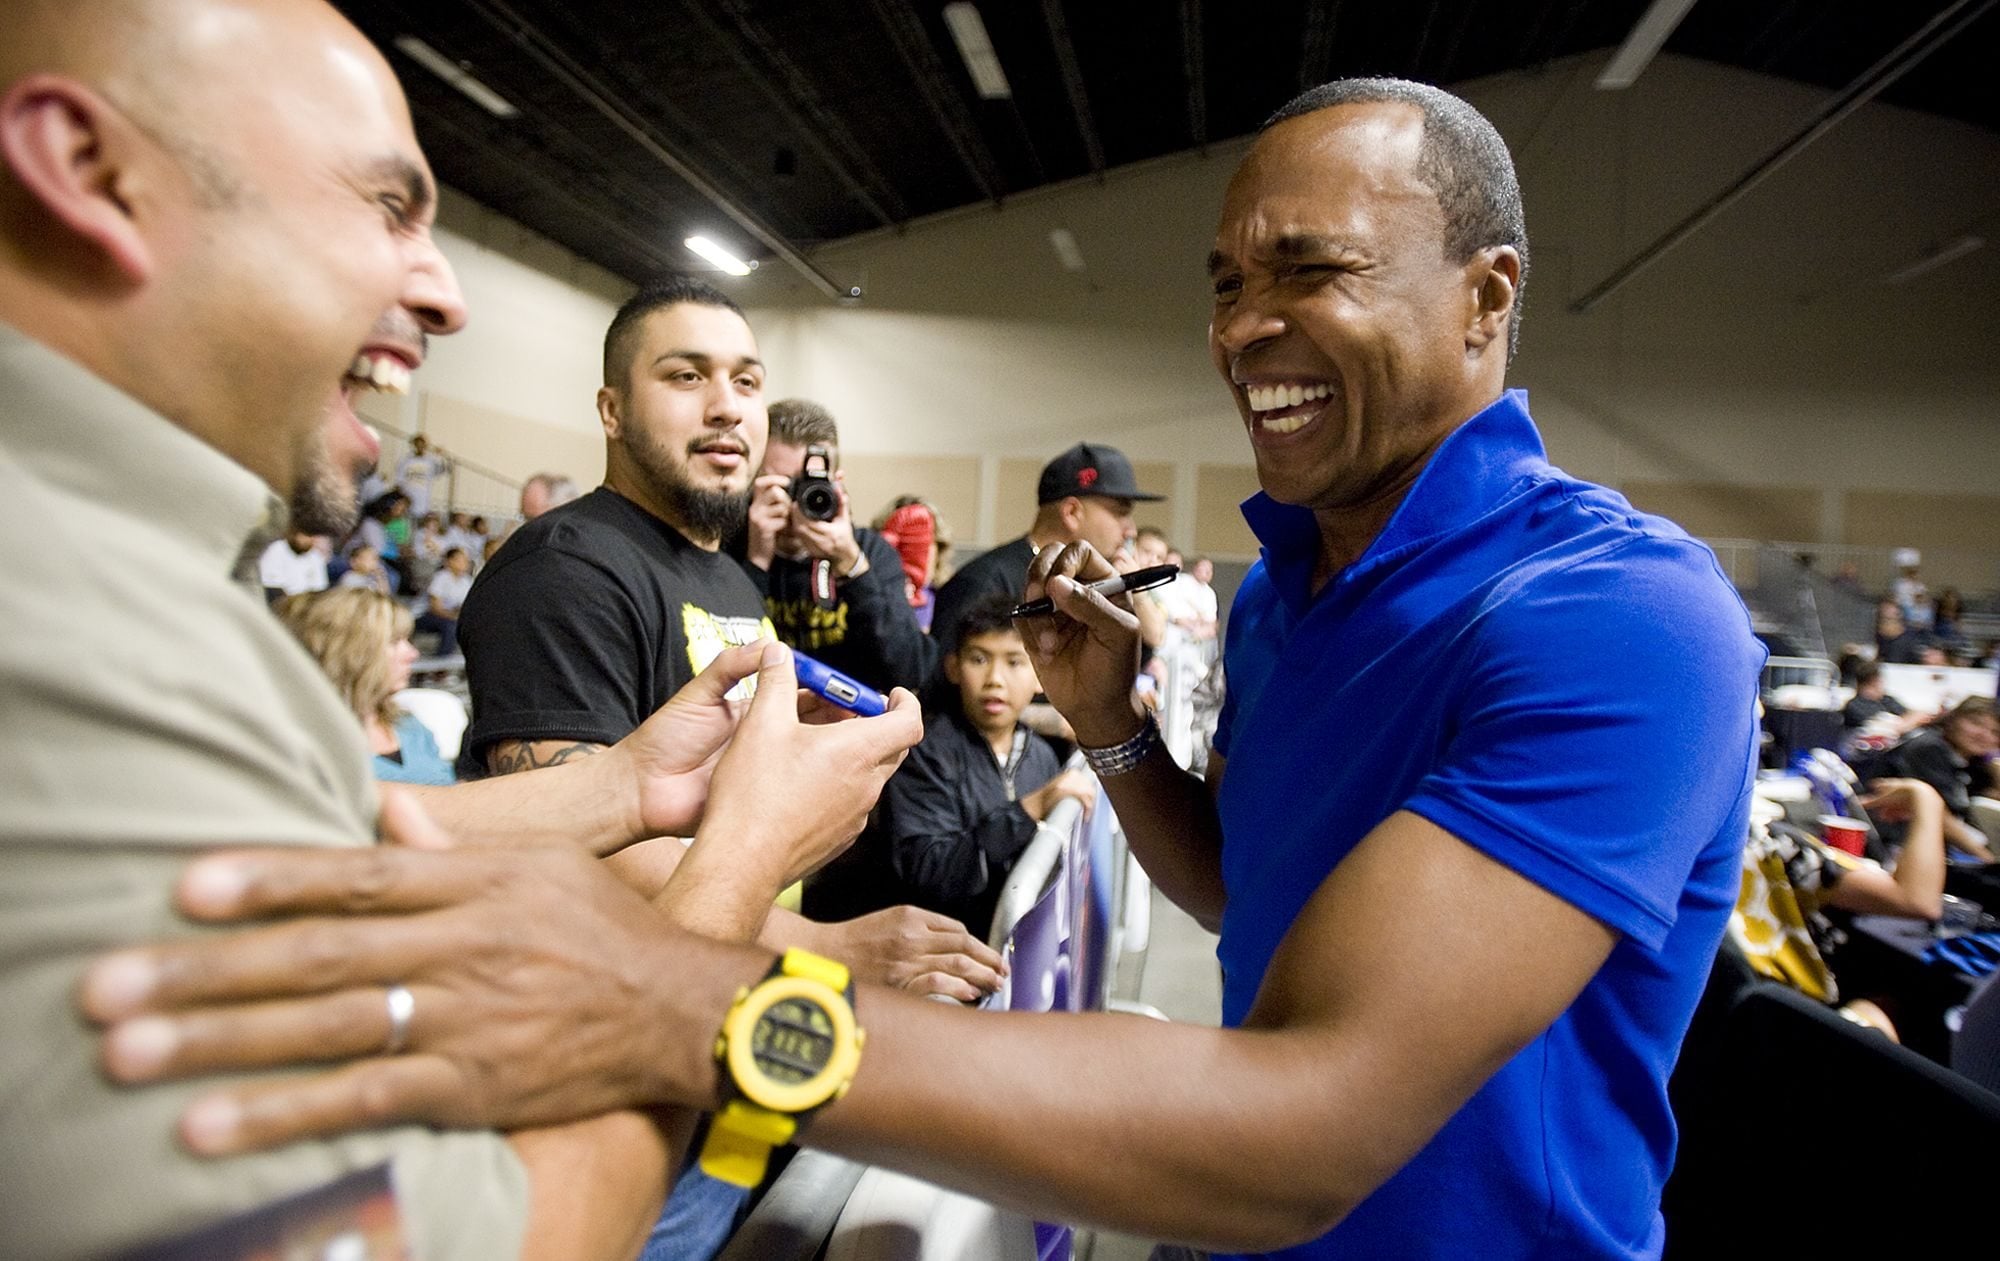 Boxing legend Sugar Ray Leonard greets fans and signs autographs Saturday at the Vancouver PAL Fight Night at the Clark County Event Center.